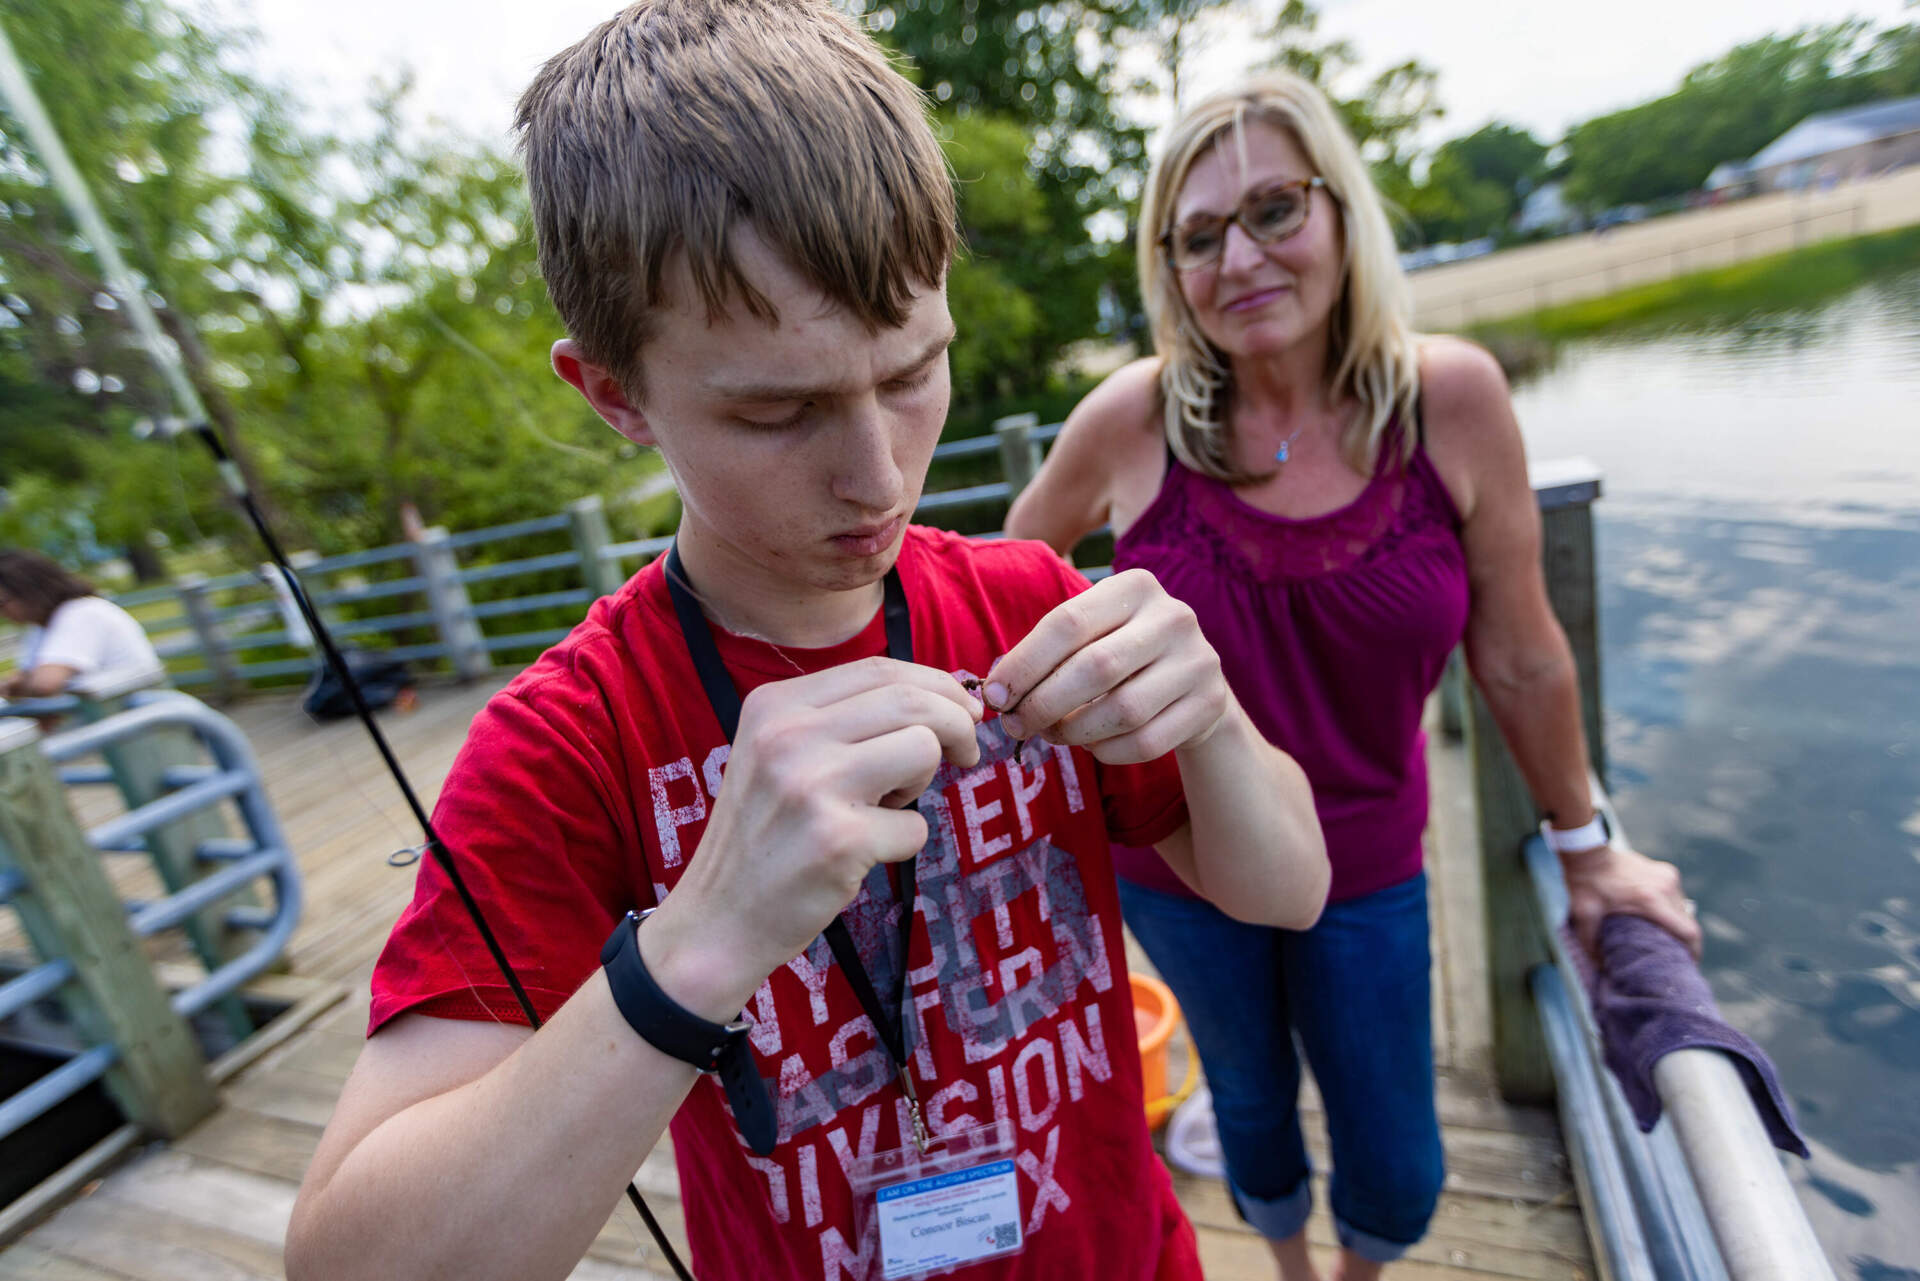 Roberta Biscan watches as her son Connor attempts to bait a fishing hook on the pier at Silver Lake. (Jesse Costa/WBUR)